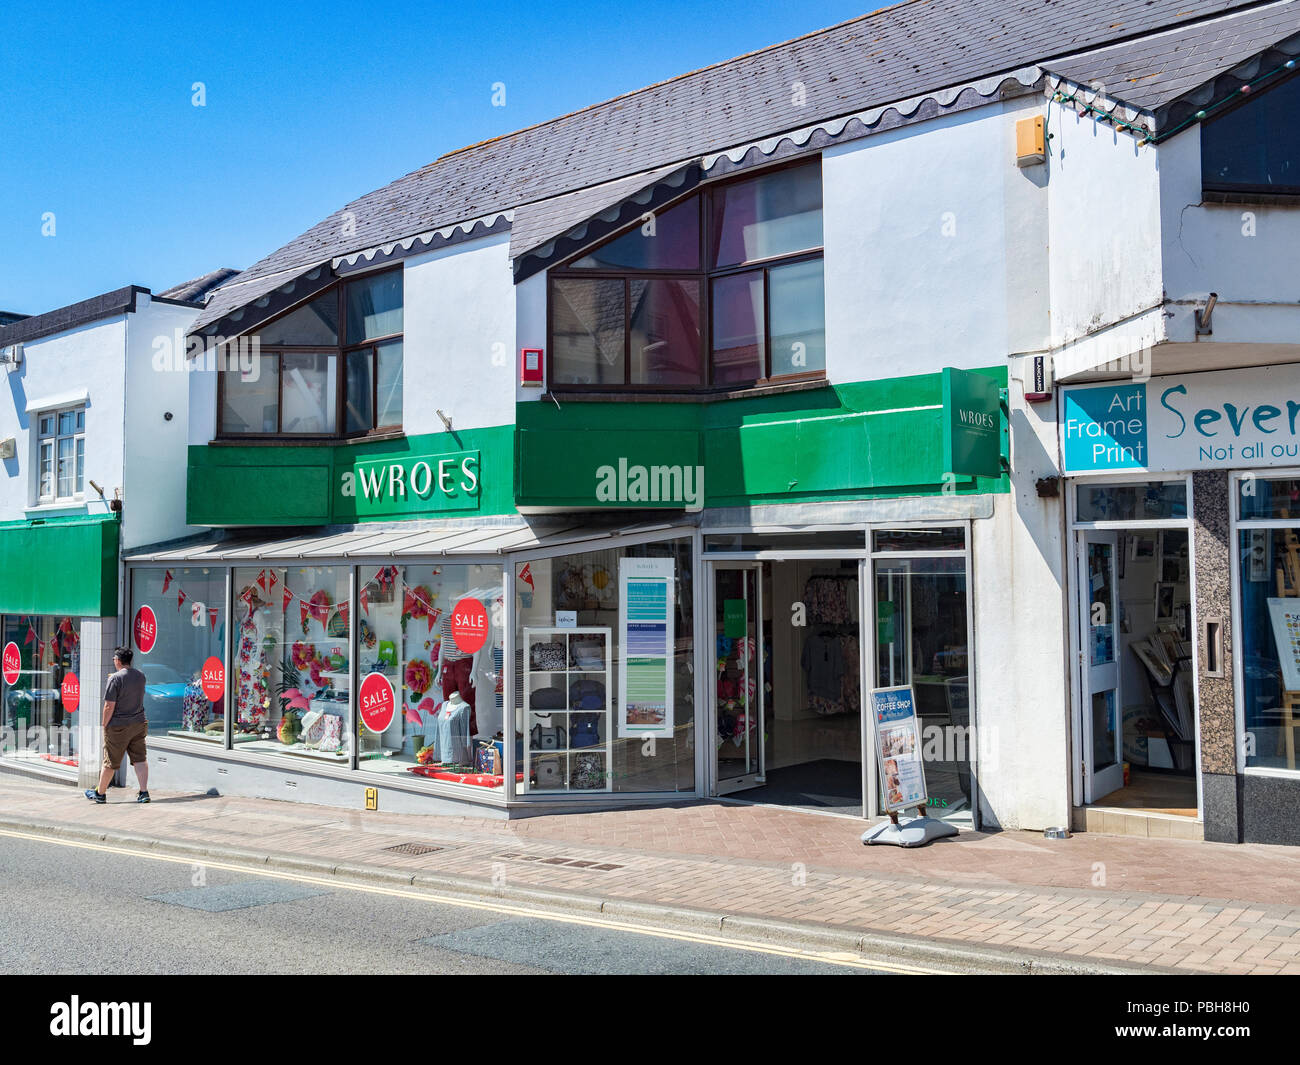 7 July 2018: Bude, Cornwall, UK - Wroes Department store in Belle View, Bude, Cornwall, UK. Stock Photo